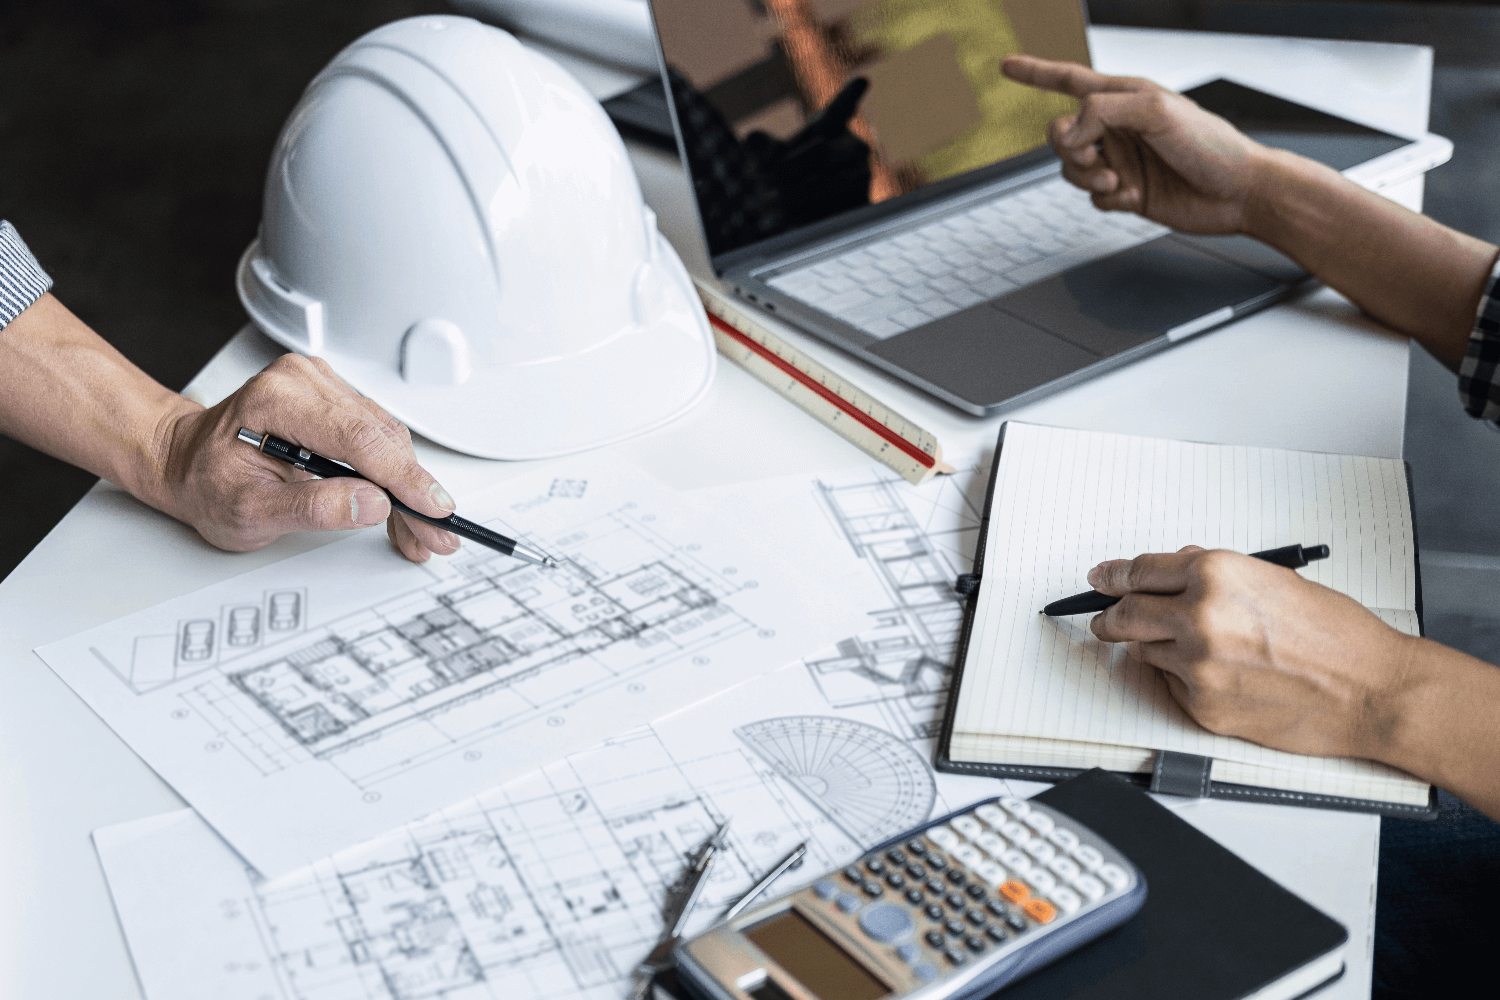 Things To Consider When Selecting a Home Designer or Architect